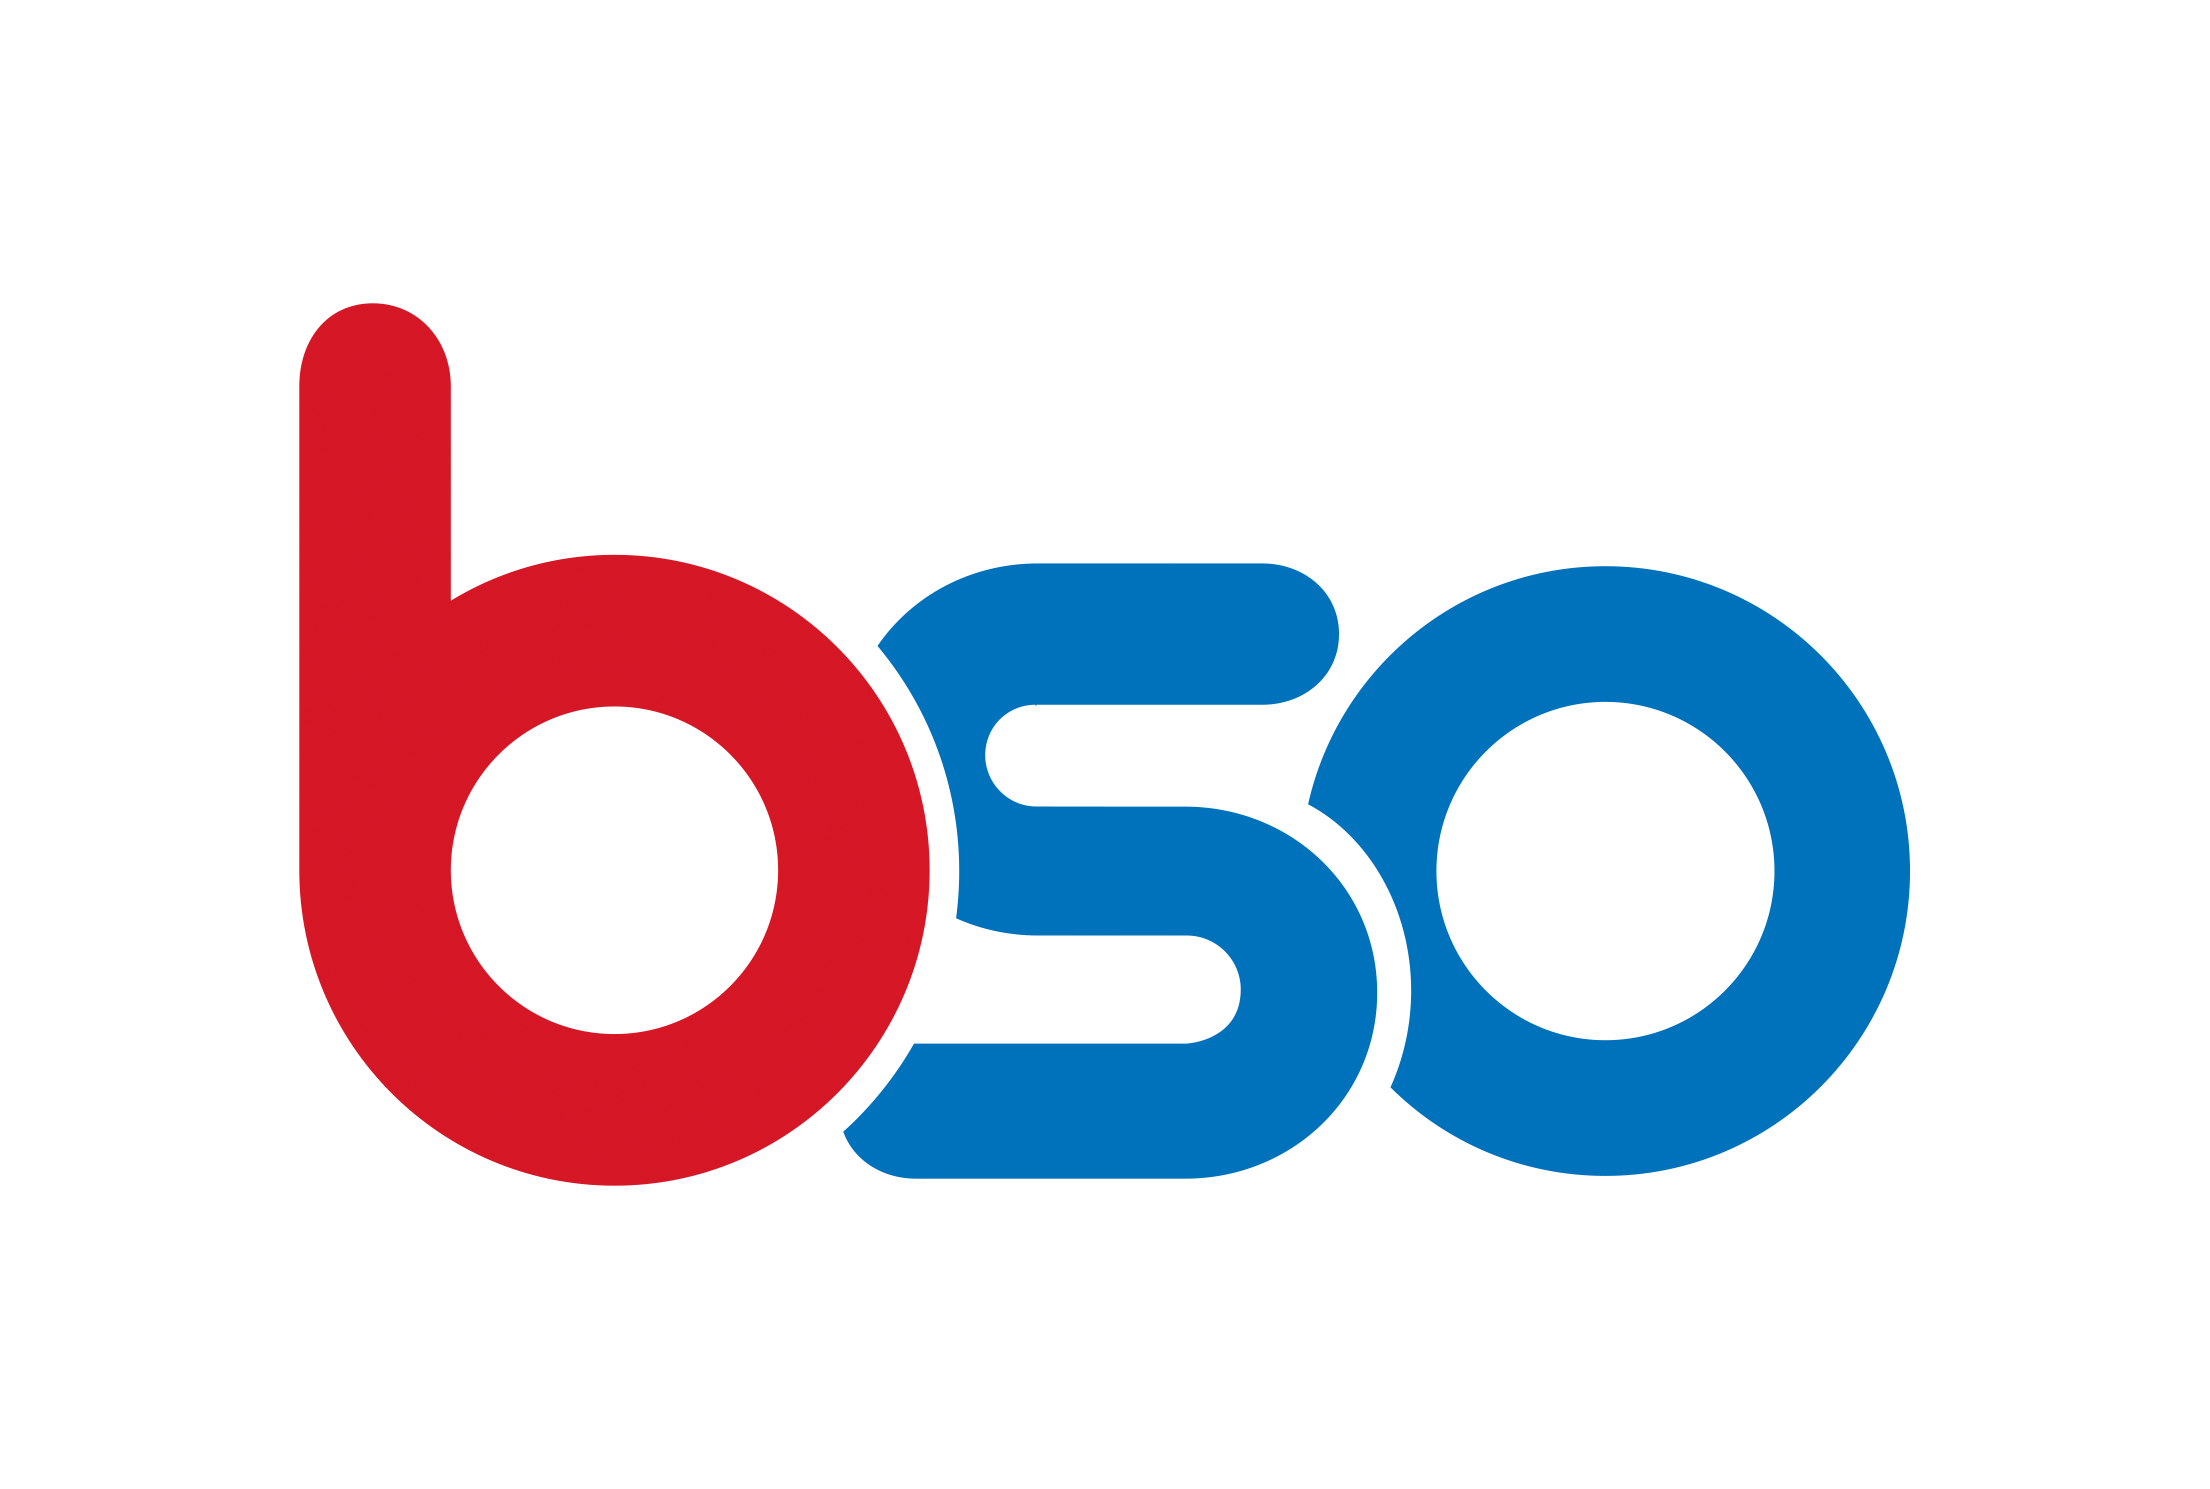 bso